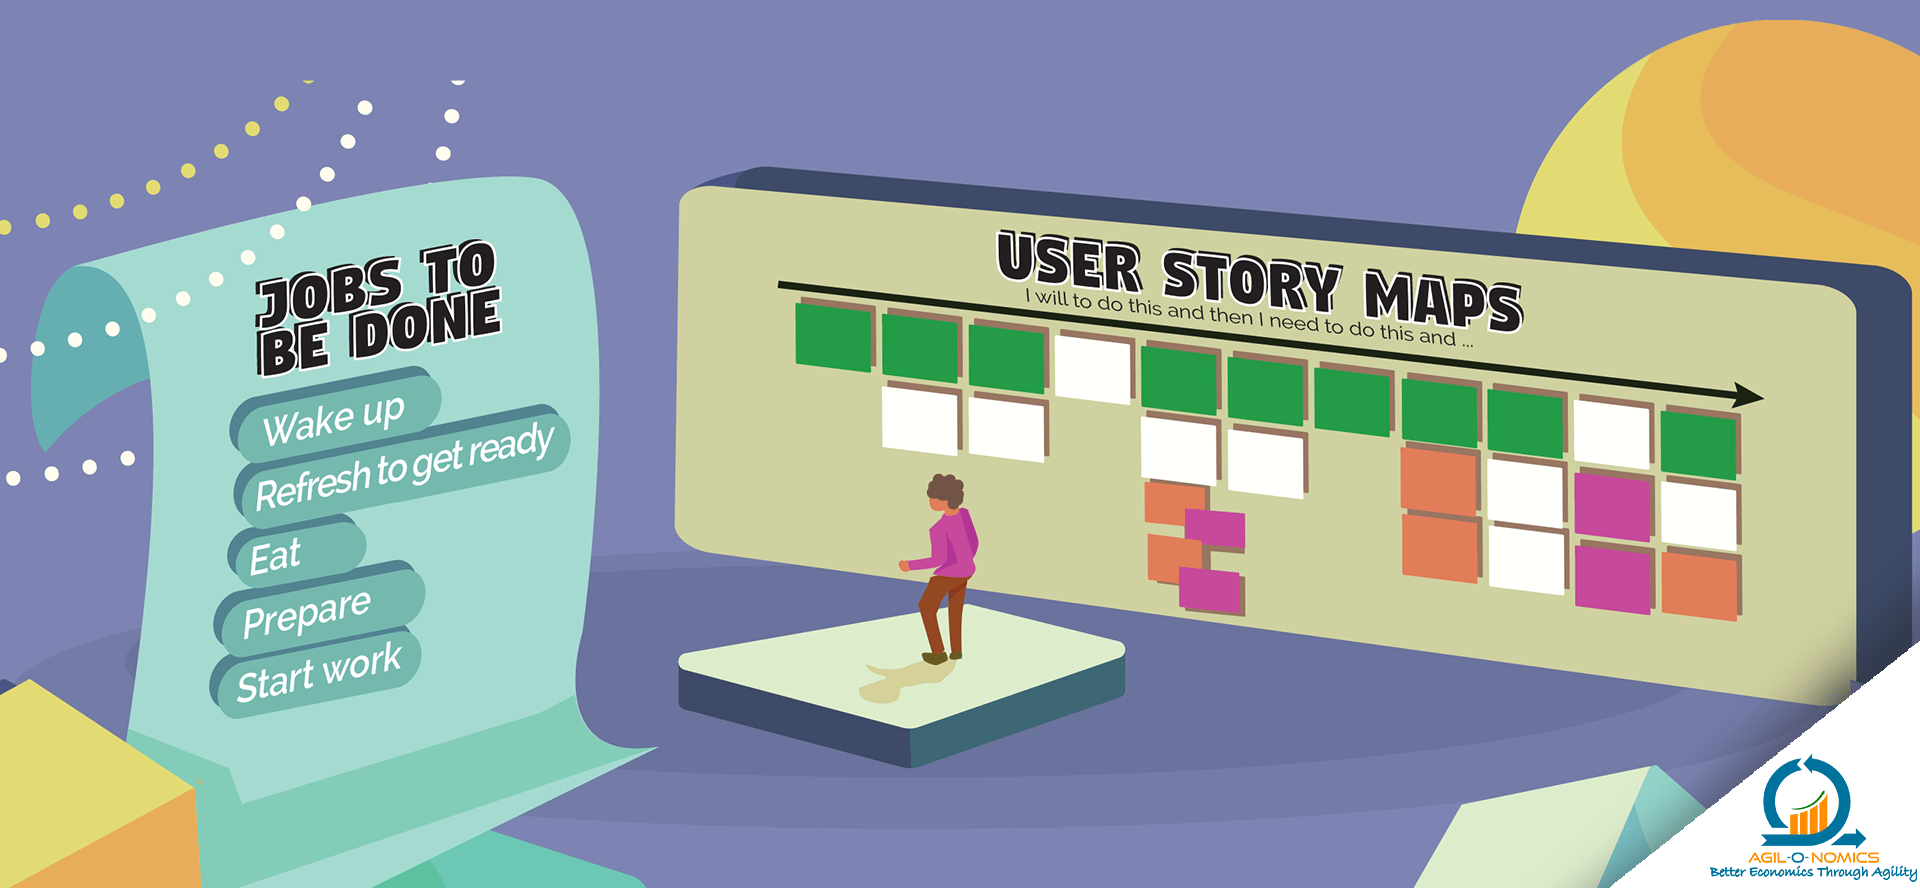 jobs to be done vs user story maps